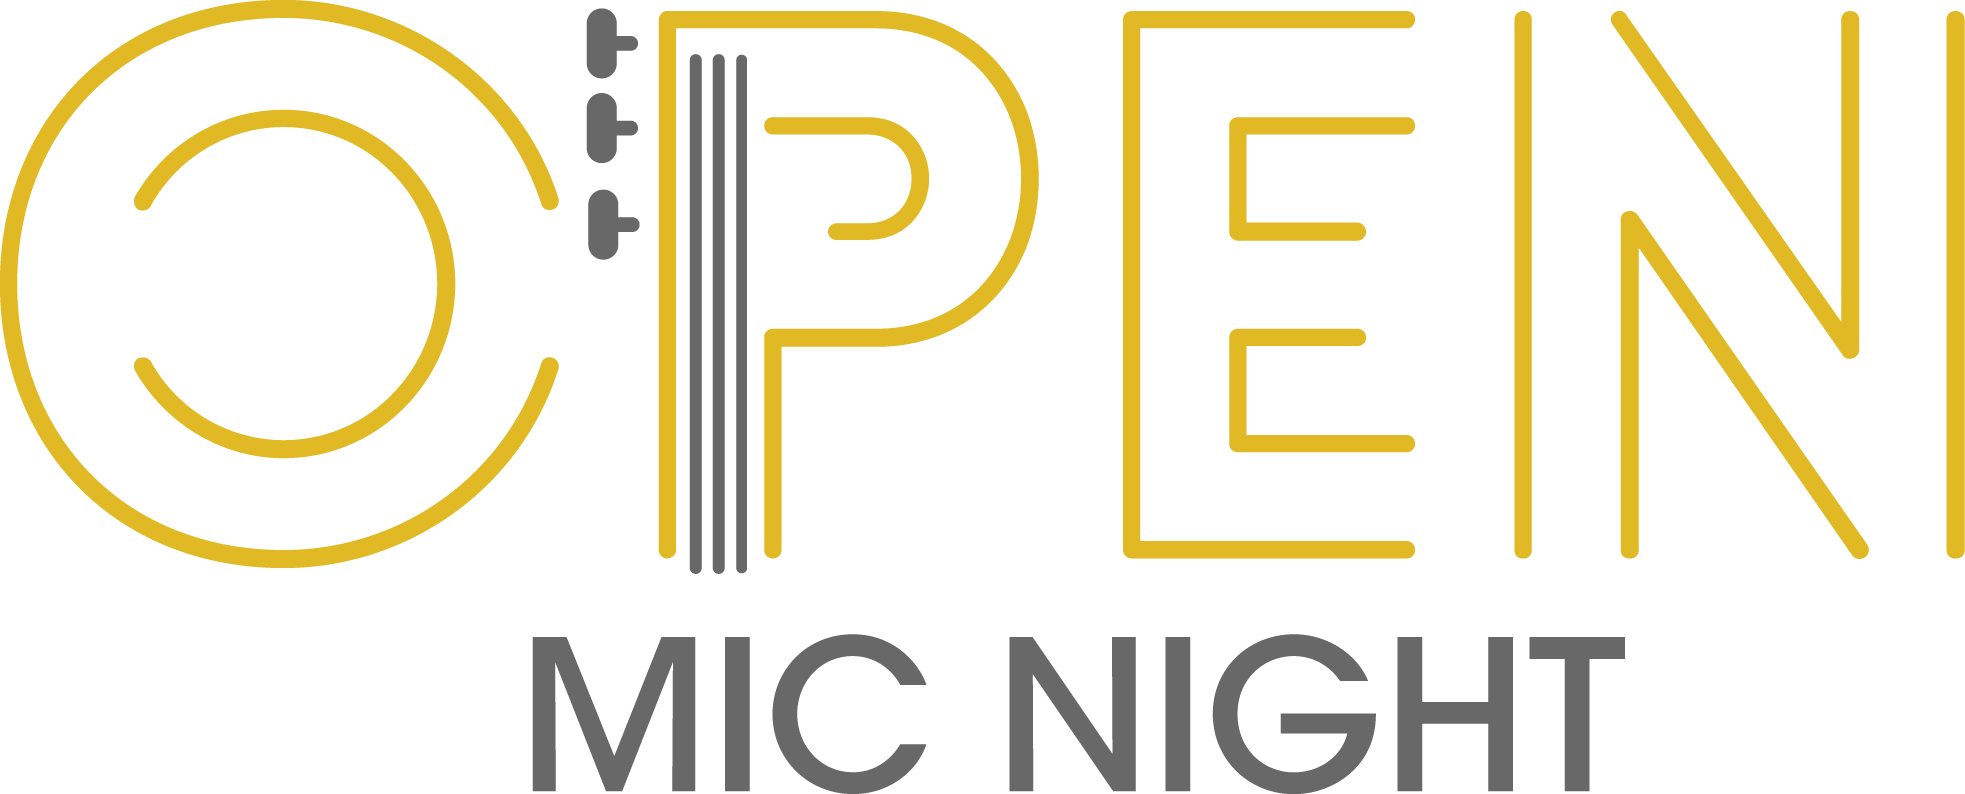 Openmic - Open Mic, Transparent background PNG HD thumbnail